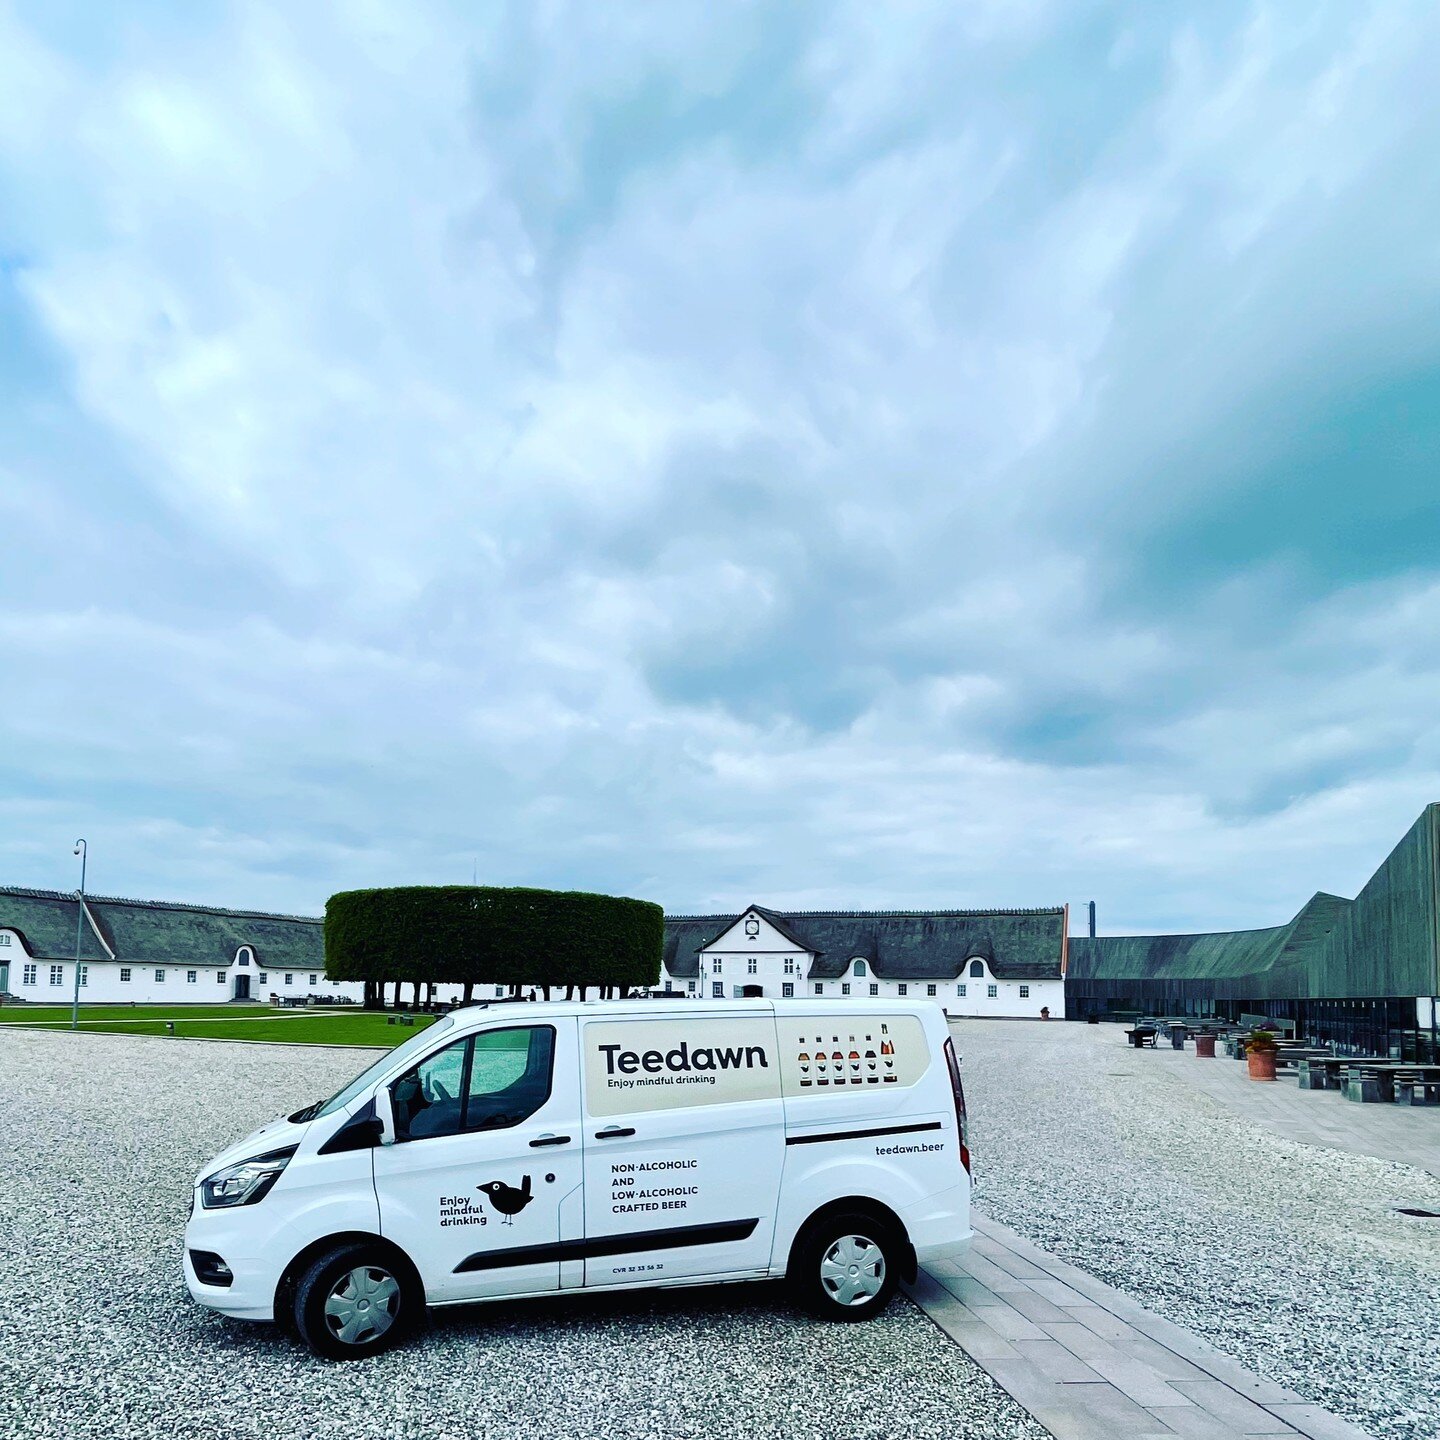 When the world's leading people in the fight against obesity and diabetes is braintraning, it takes place at Novo's own award-winning Campus, Favrholm. Teedawn ensures that everyone stays clear and present. We feel privileged. #favrholmcampus #novo #